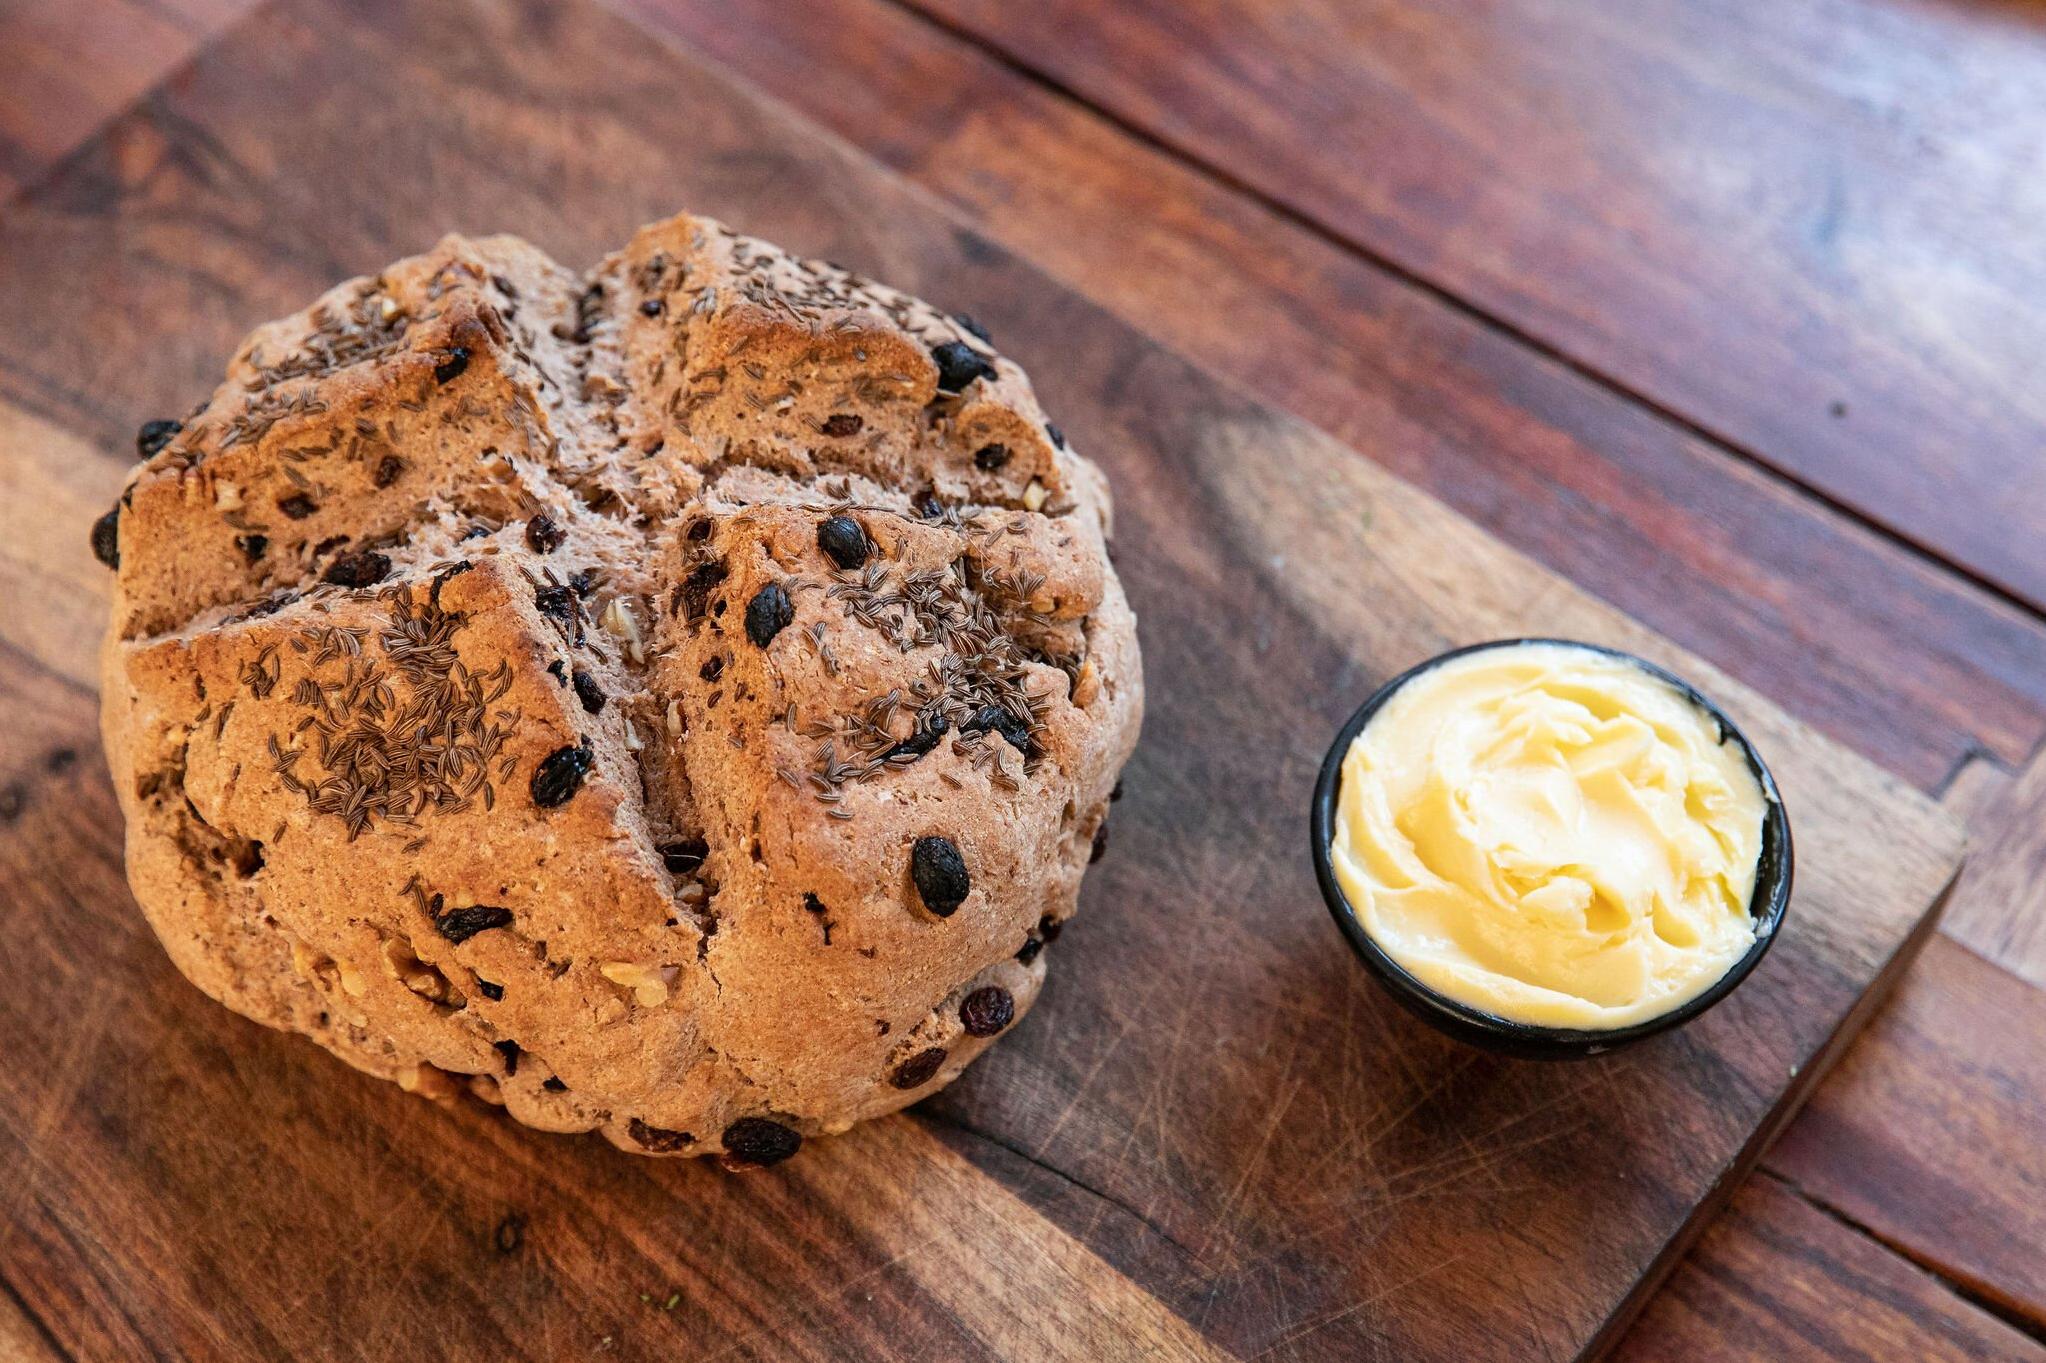  A slice of this bread with a generous slather of whiskey butter is a little slice of heaven.